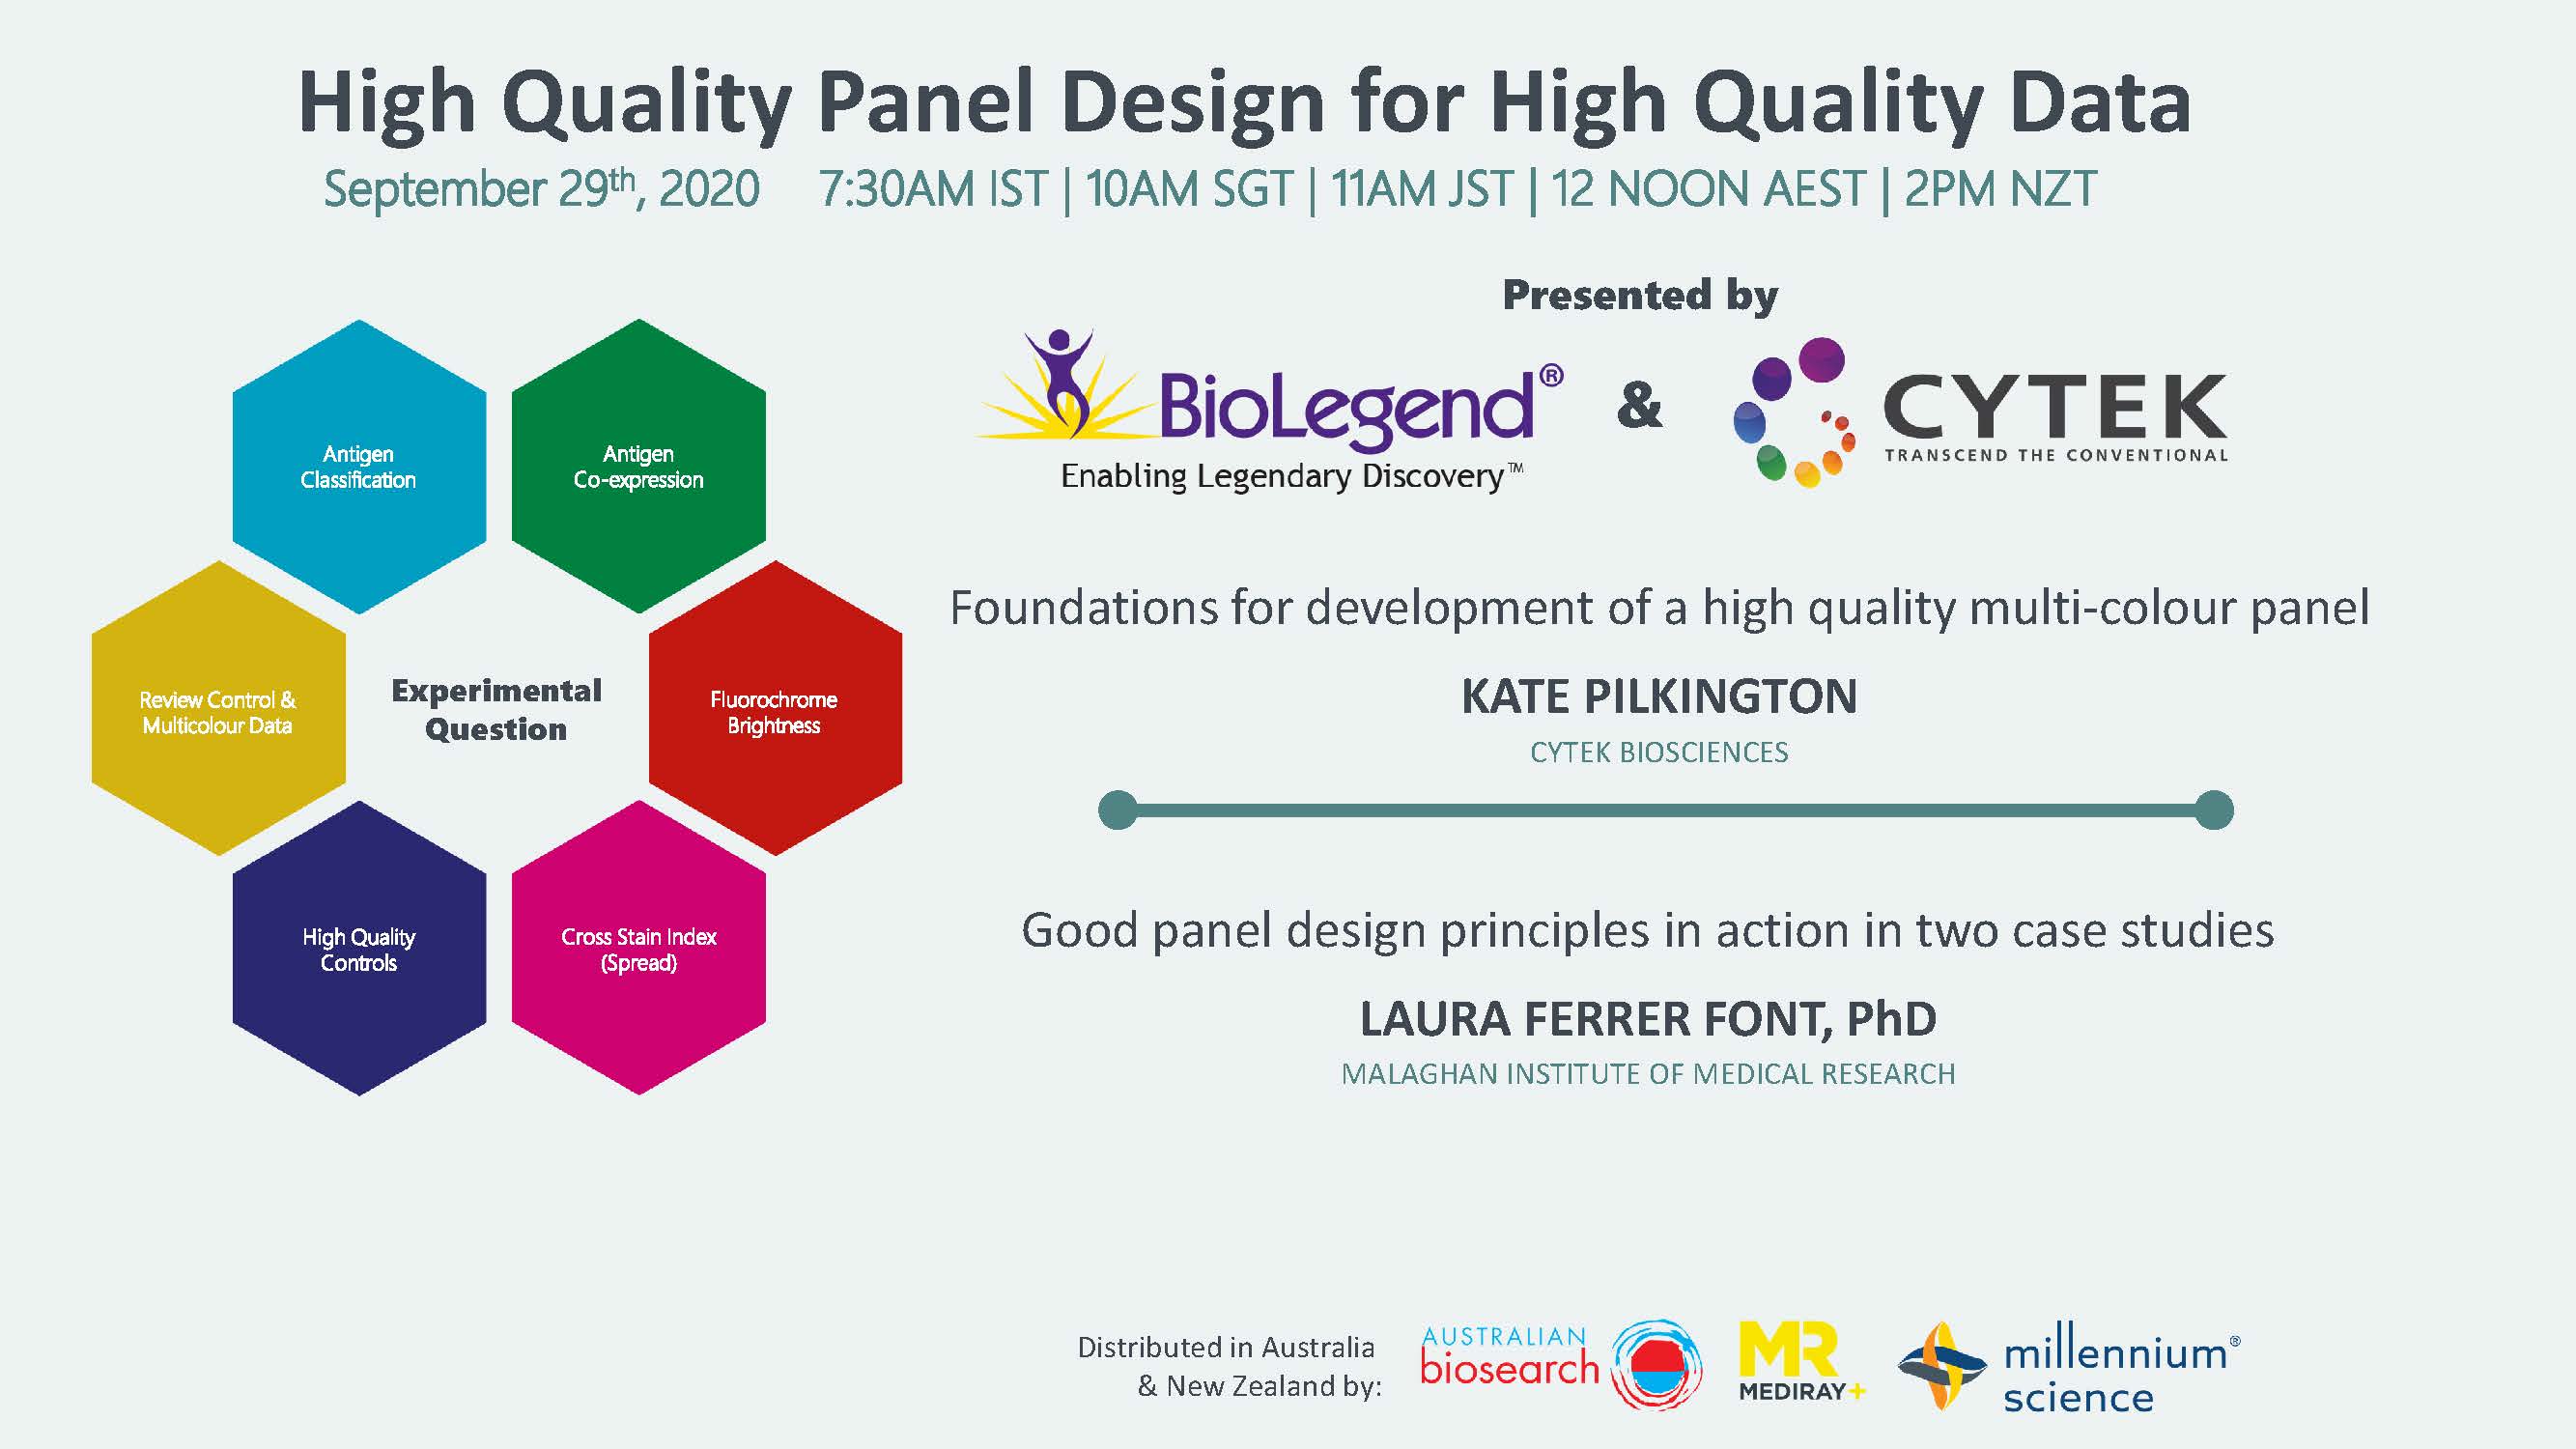 Cytek Biosciences on Twitter: "Join us for a free webinar: High Panel Design for High Quality Data. Speakers Kate Pilkington Bio) and Laura Ferrer Font, PhD (Malaghan Institute) will present